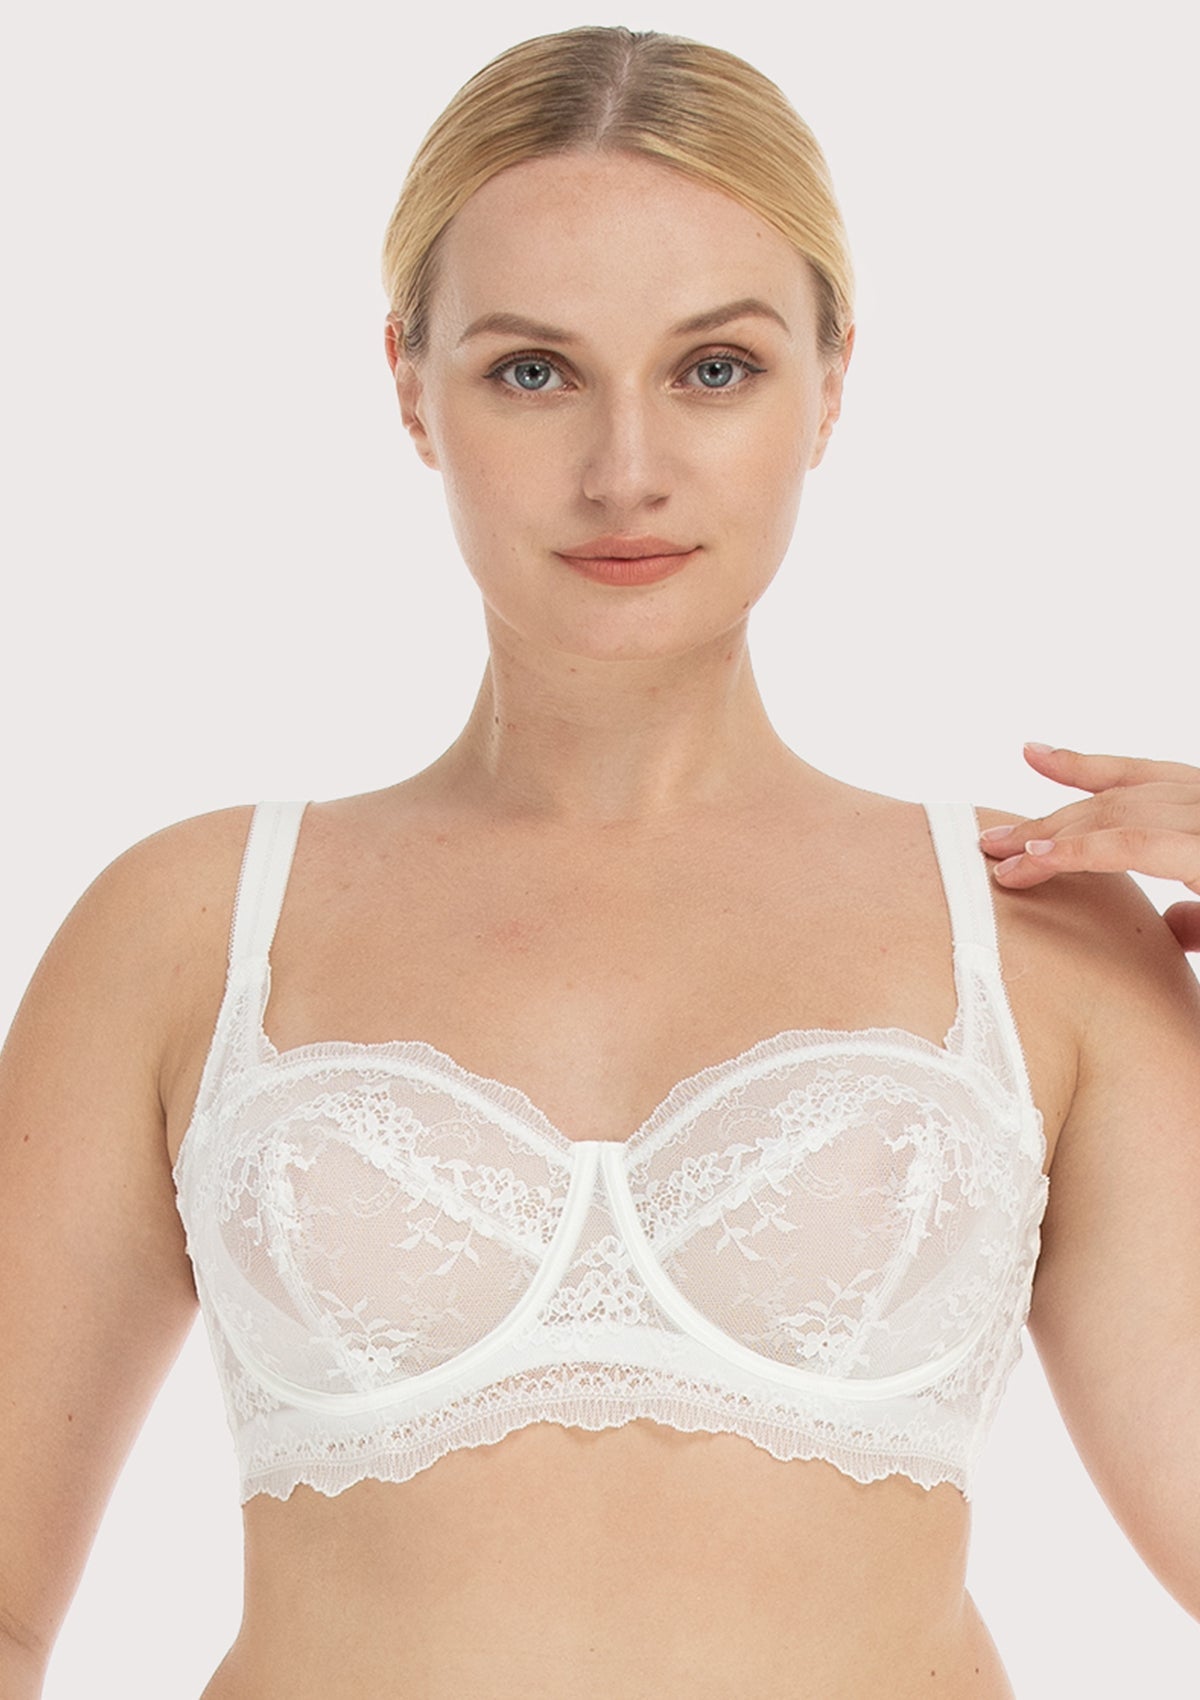 HSIA I Do Floral Lace Bridal Balconette Beautiful Bra For Special Day - White / 36 / DDD/F